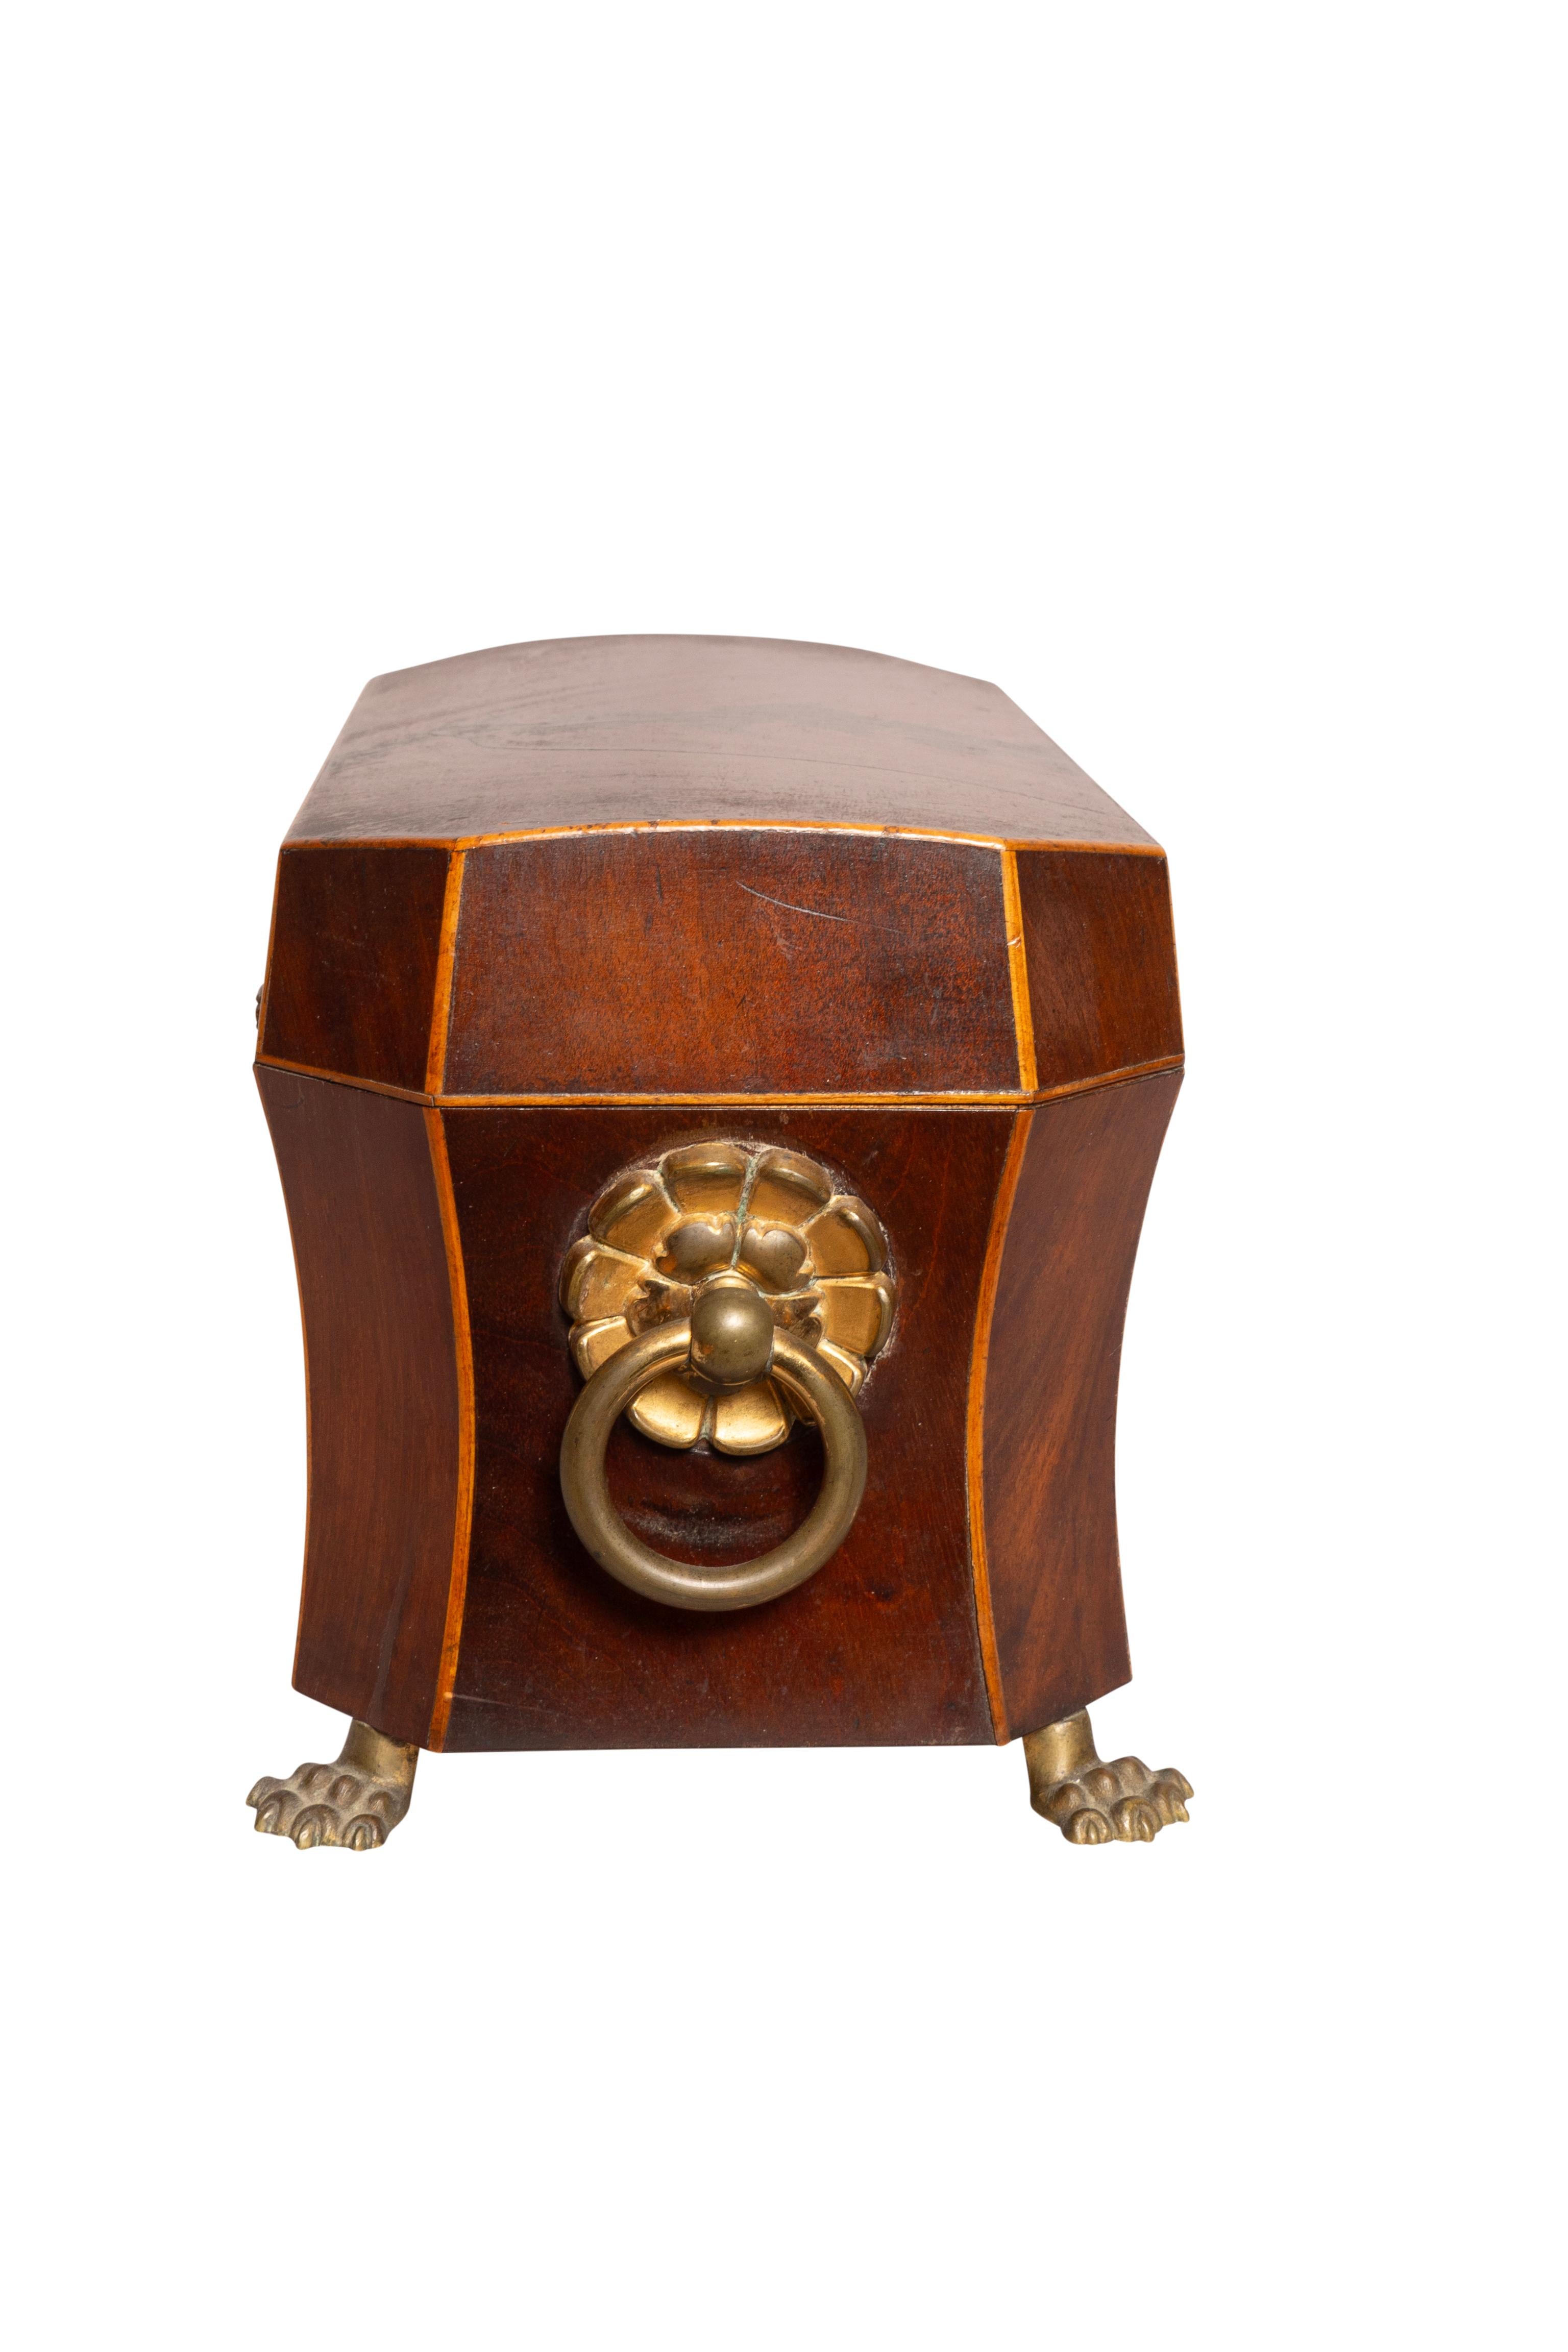 Regency Mahogany Tea Caddy With Cut Glass Containers In Good Condition For Sale In Essex, MA